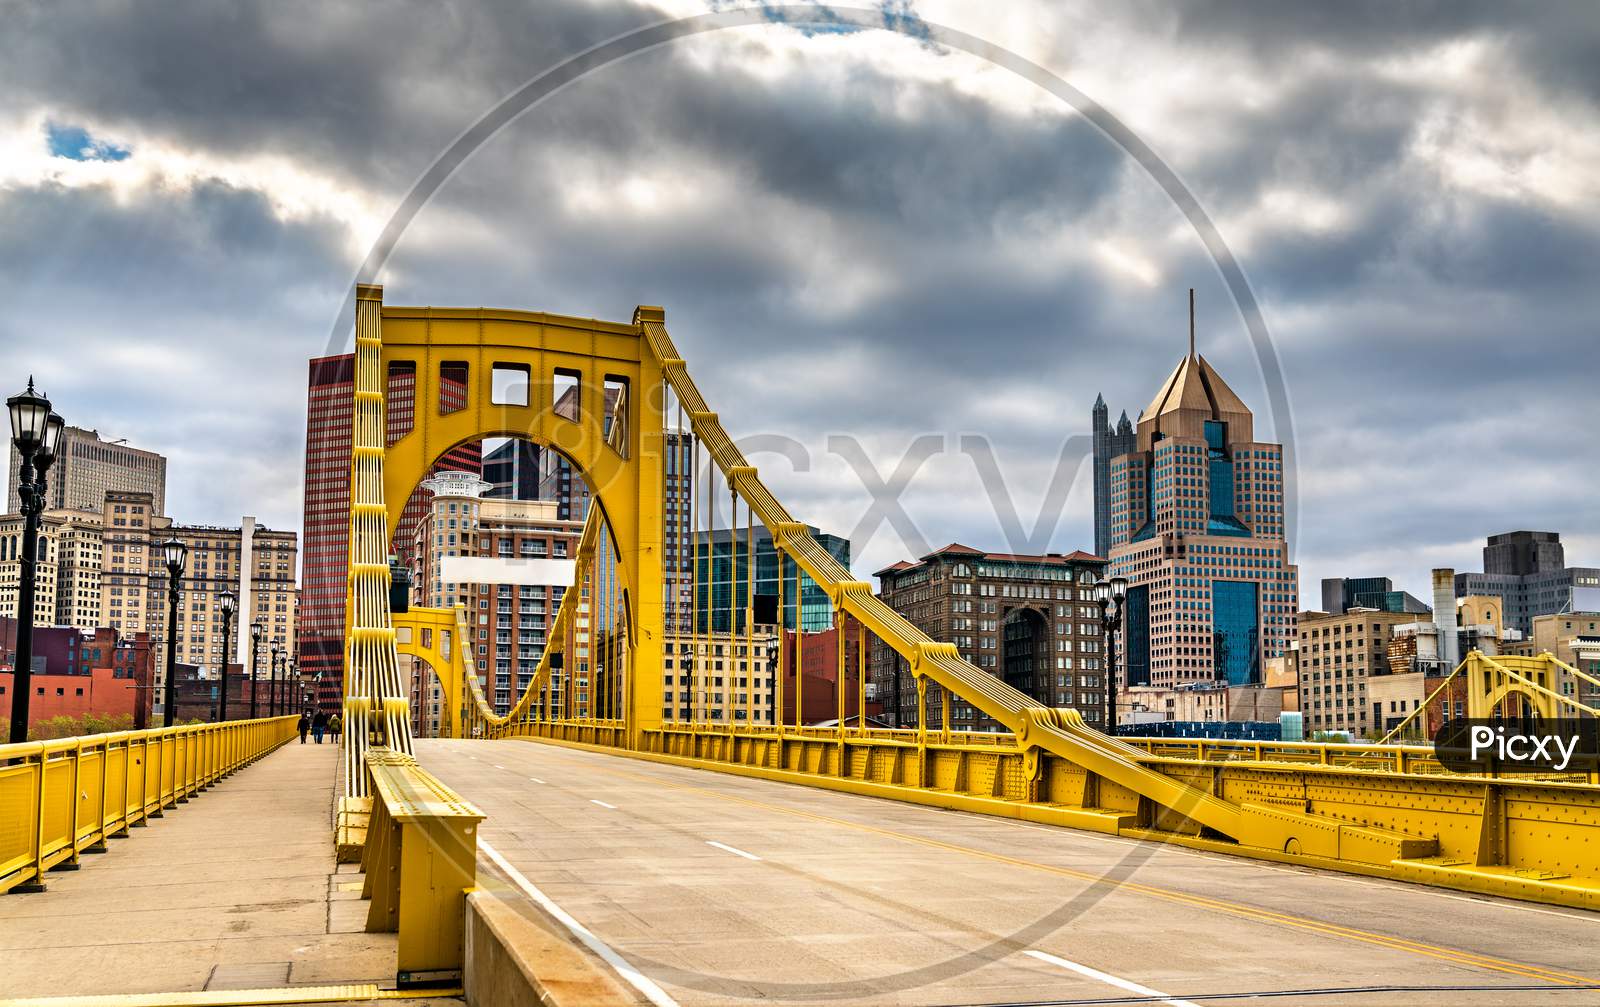 Andy Warhol Bridge Across The Allegheny River In Pittsburgh, Pennsylvania